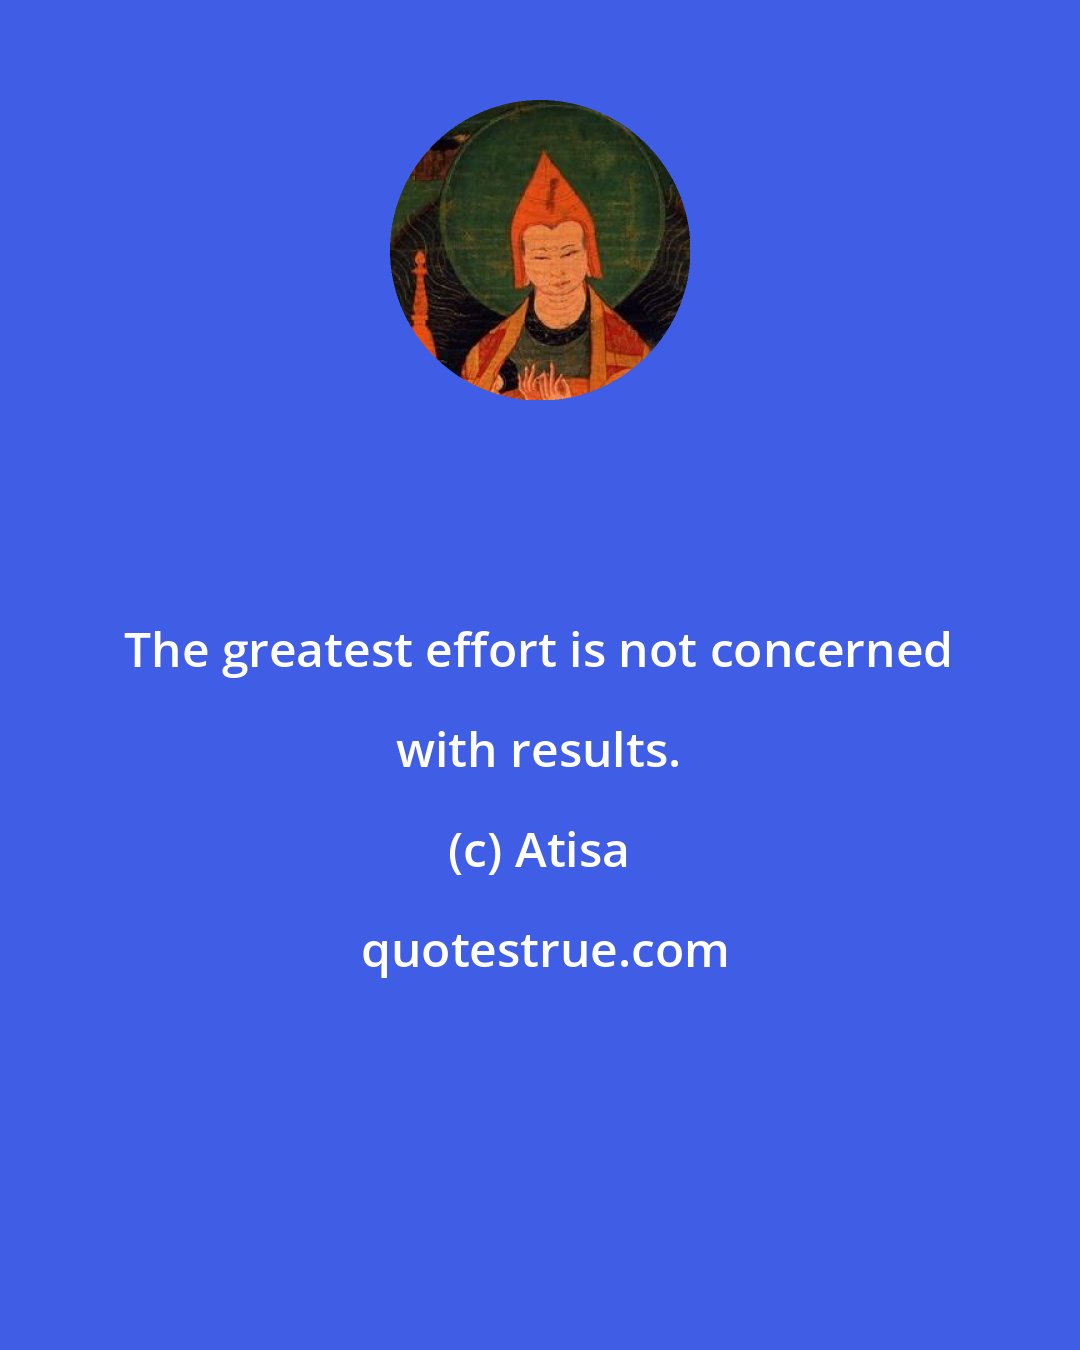 Atisa: The greatest effort is not concerned with results.